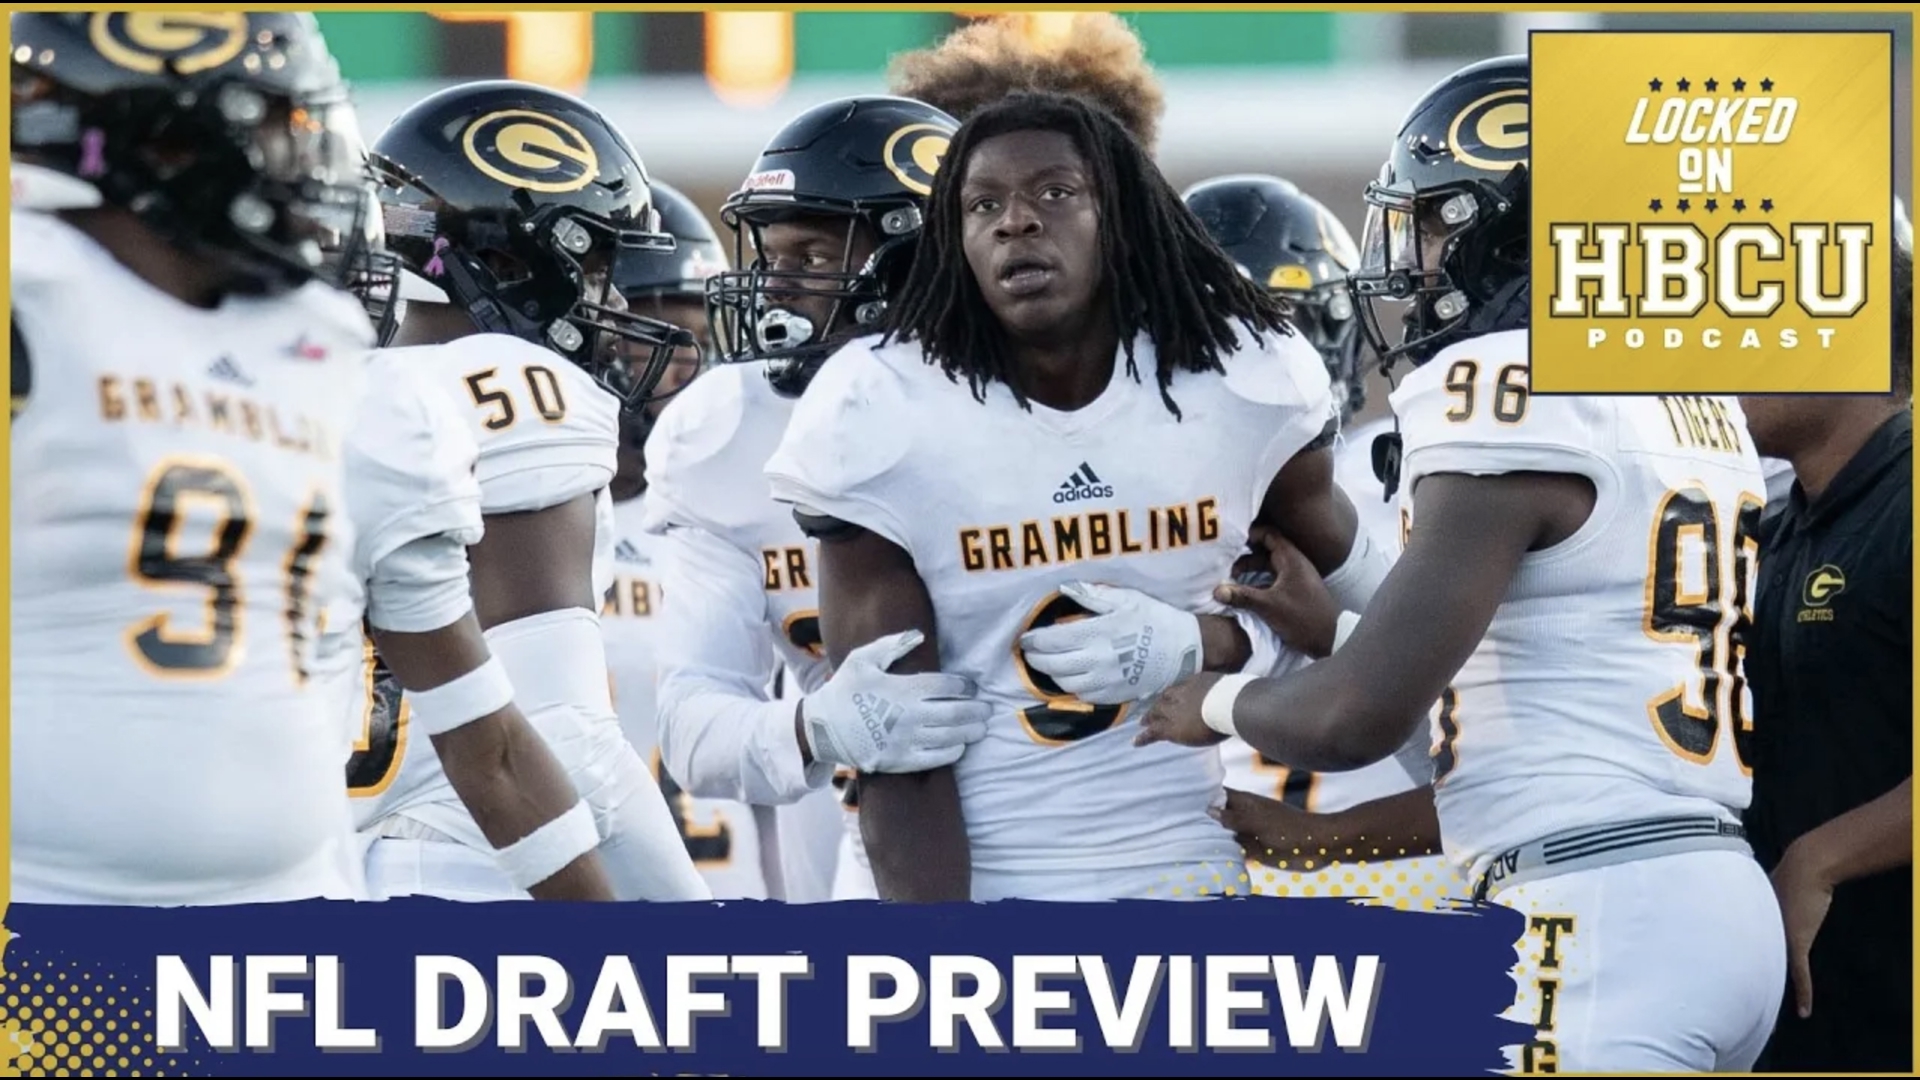 Grambling ED Sundiata Anderson highlights his pass rush ability with pressures more than sacks. Gerald Huggins issues high praise for Alabama State DB Mikey Victor